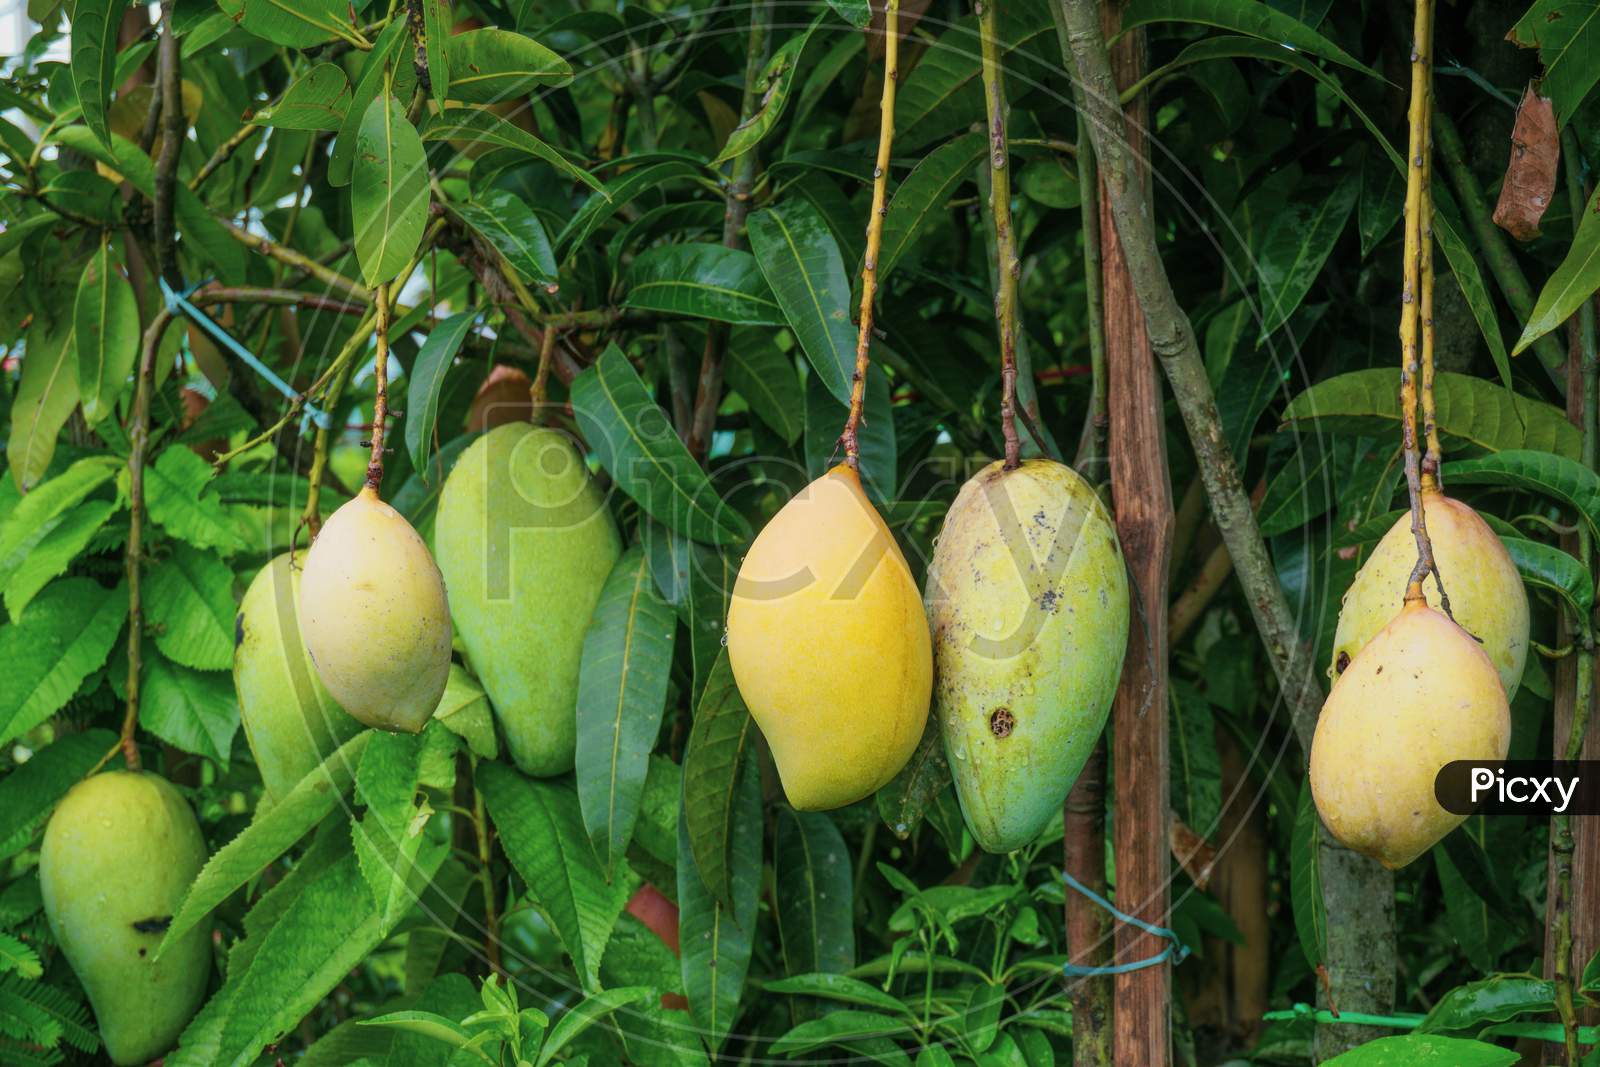 Mango Hangs In The Garden. Raw And Ripe Mango. This Is A Delicious Fruit. Mango Is Very Dear To All The People Of The World. Both Raw And Ripe Mangoes Are Very Fun To Eat. There Are Many Mango Gardens In Bangladesh.